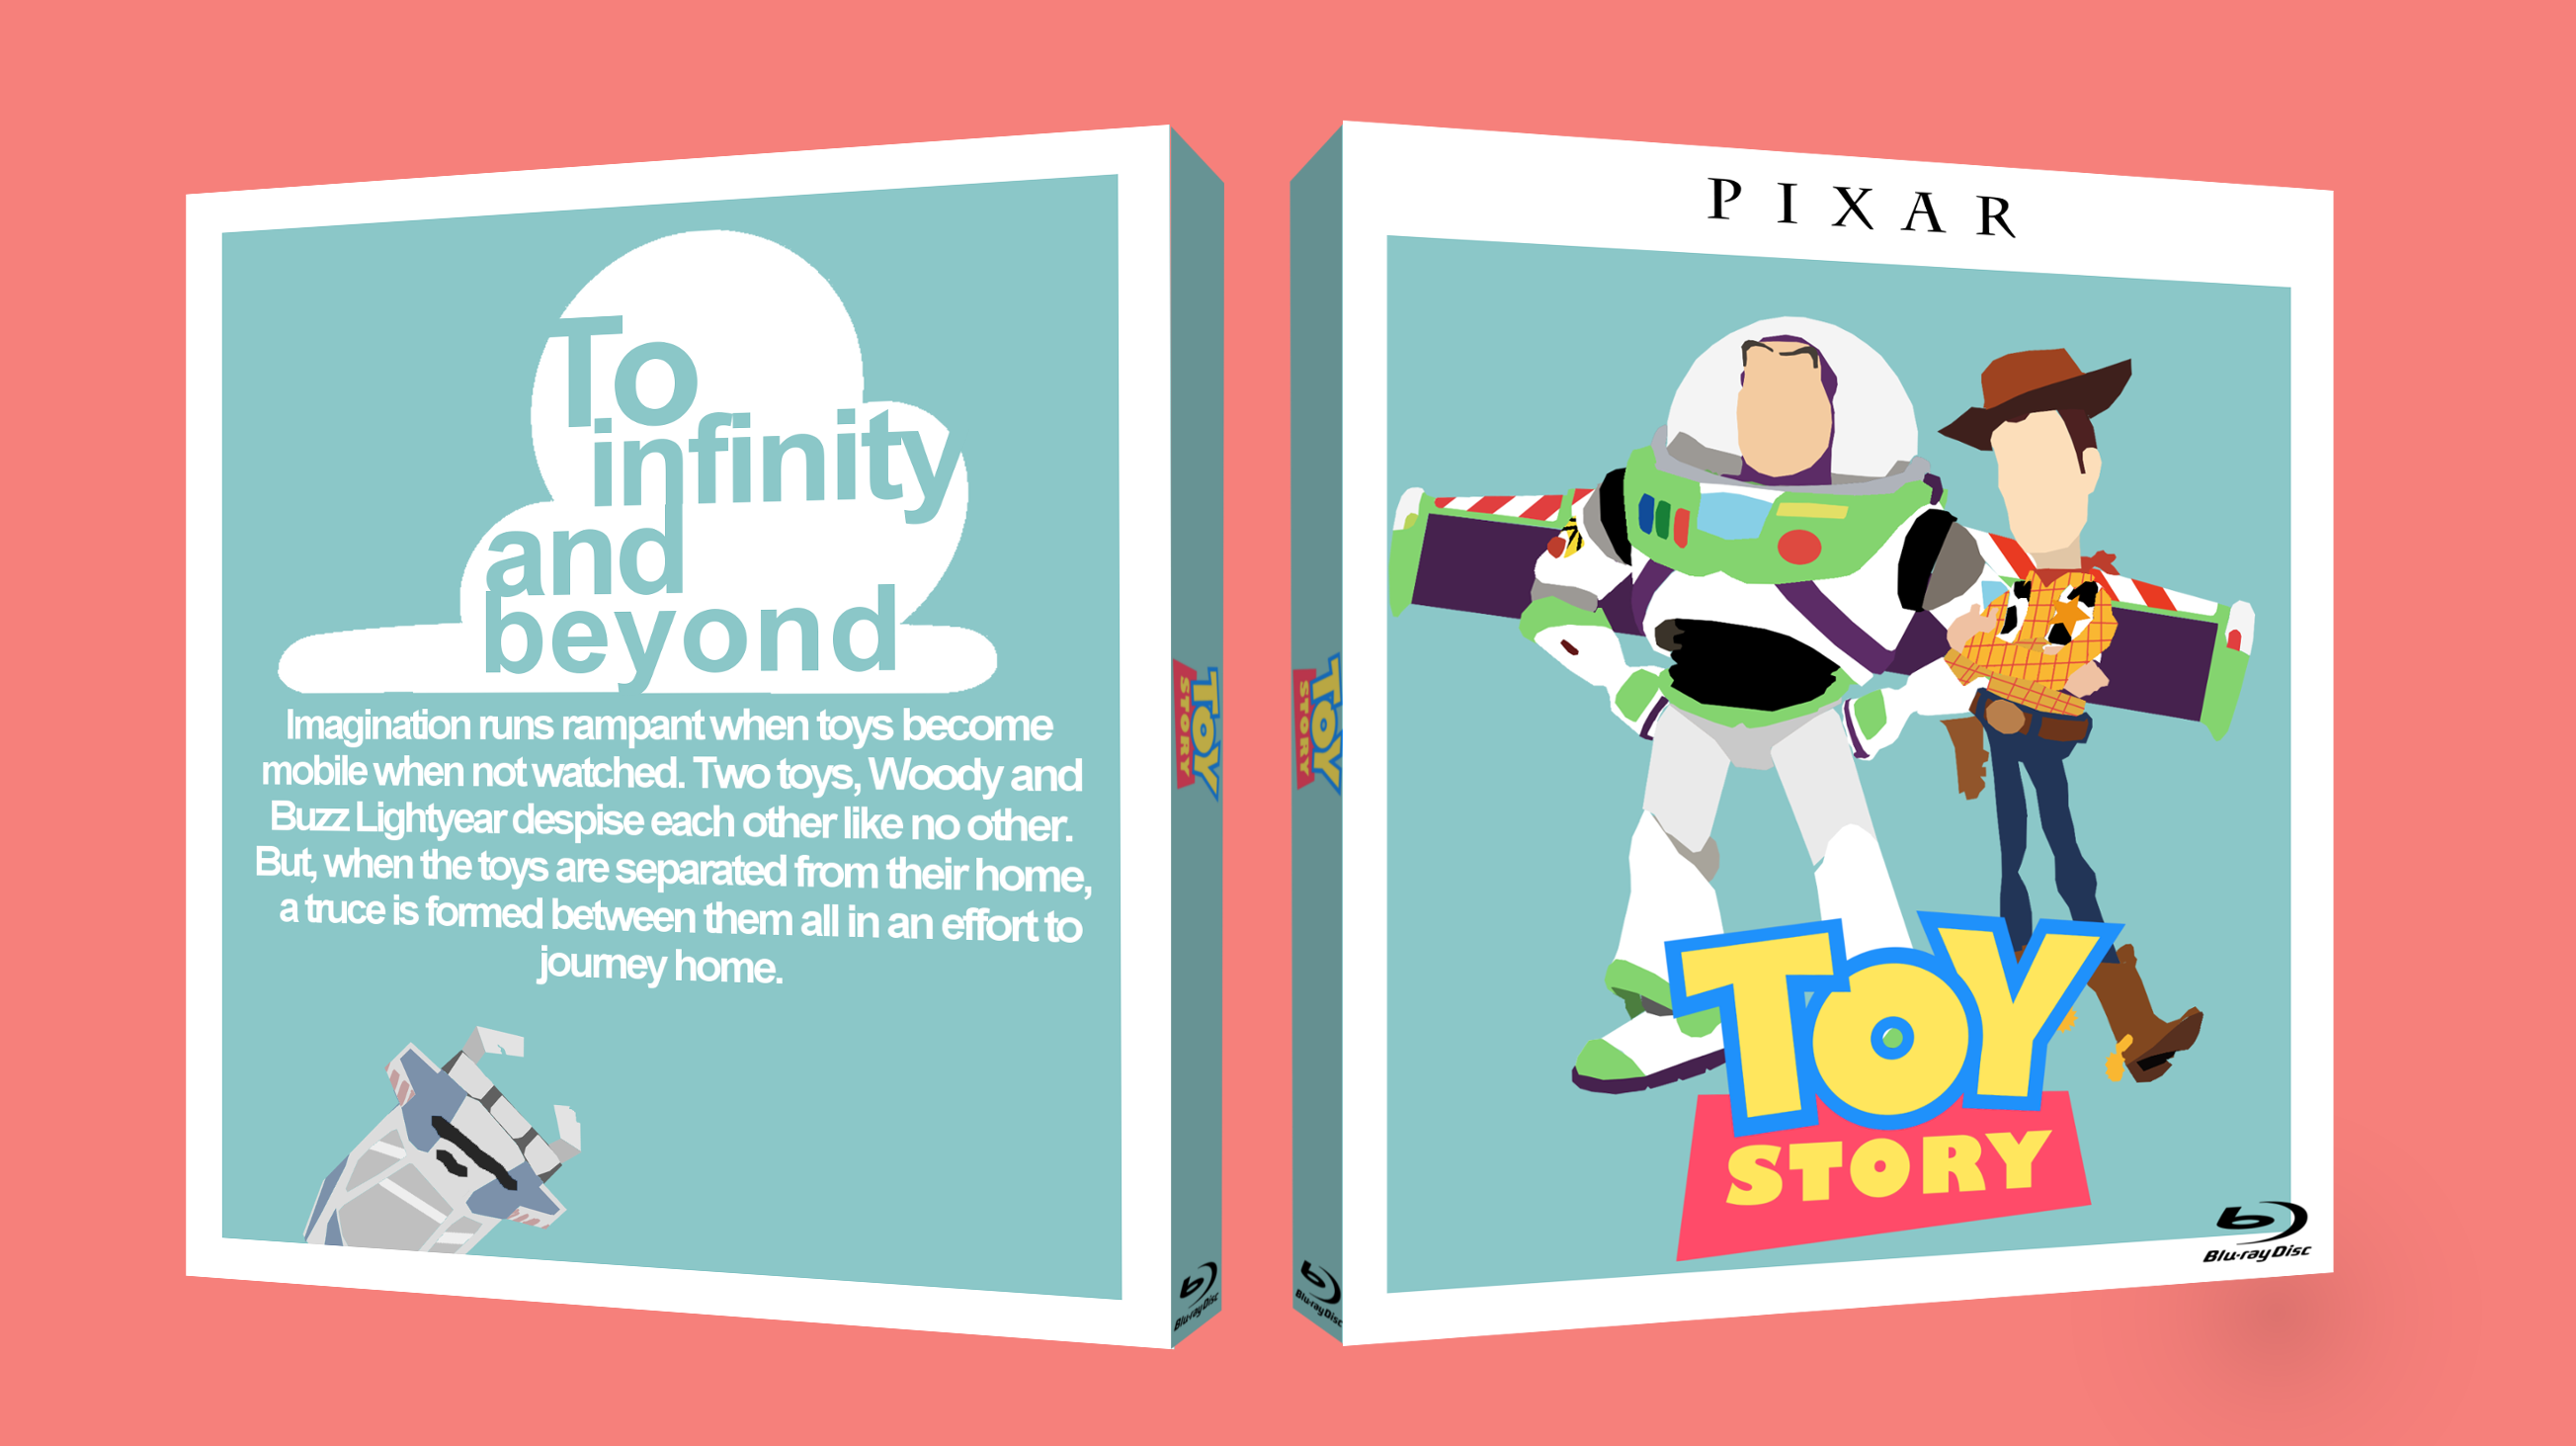 Toy Story box cover